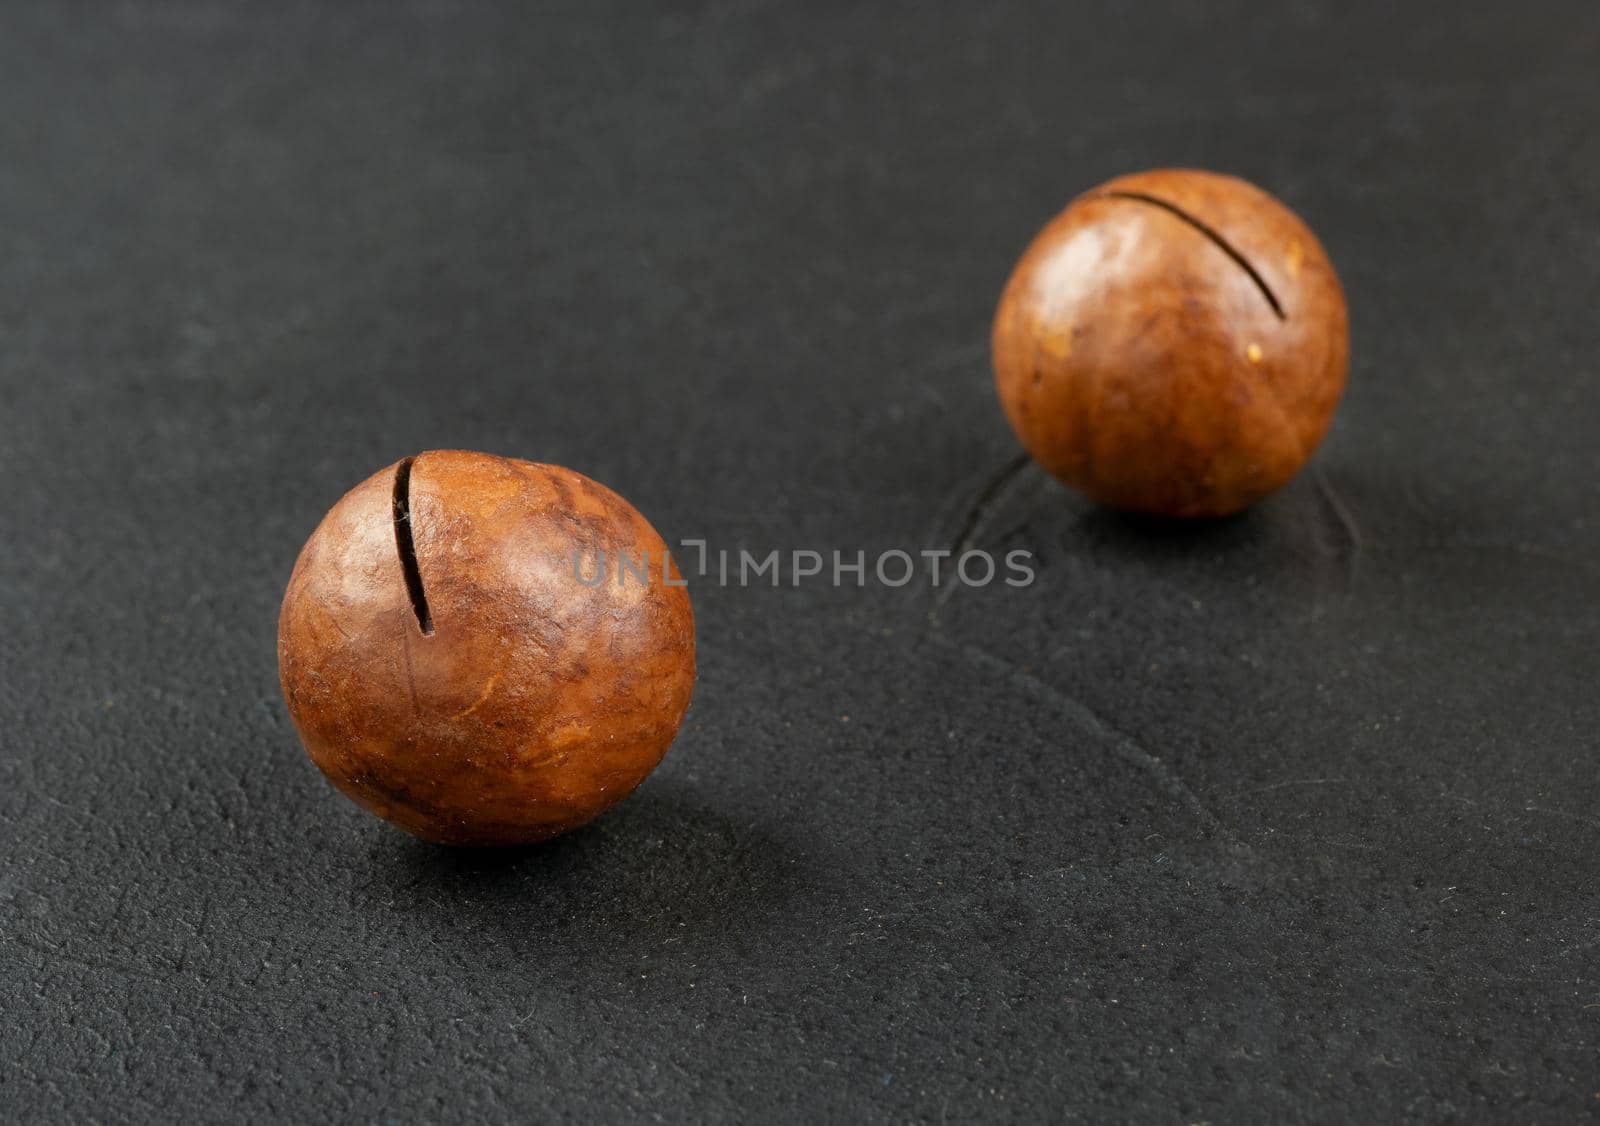 Two inshell macadamia nuts on a dark background